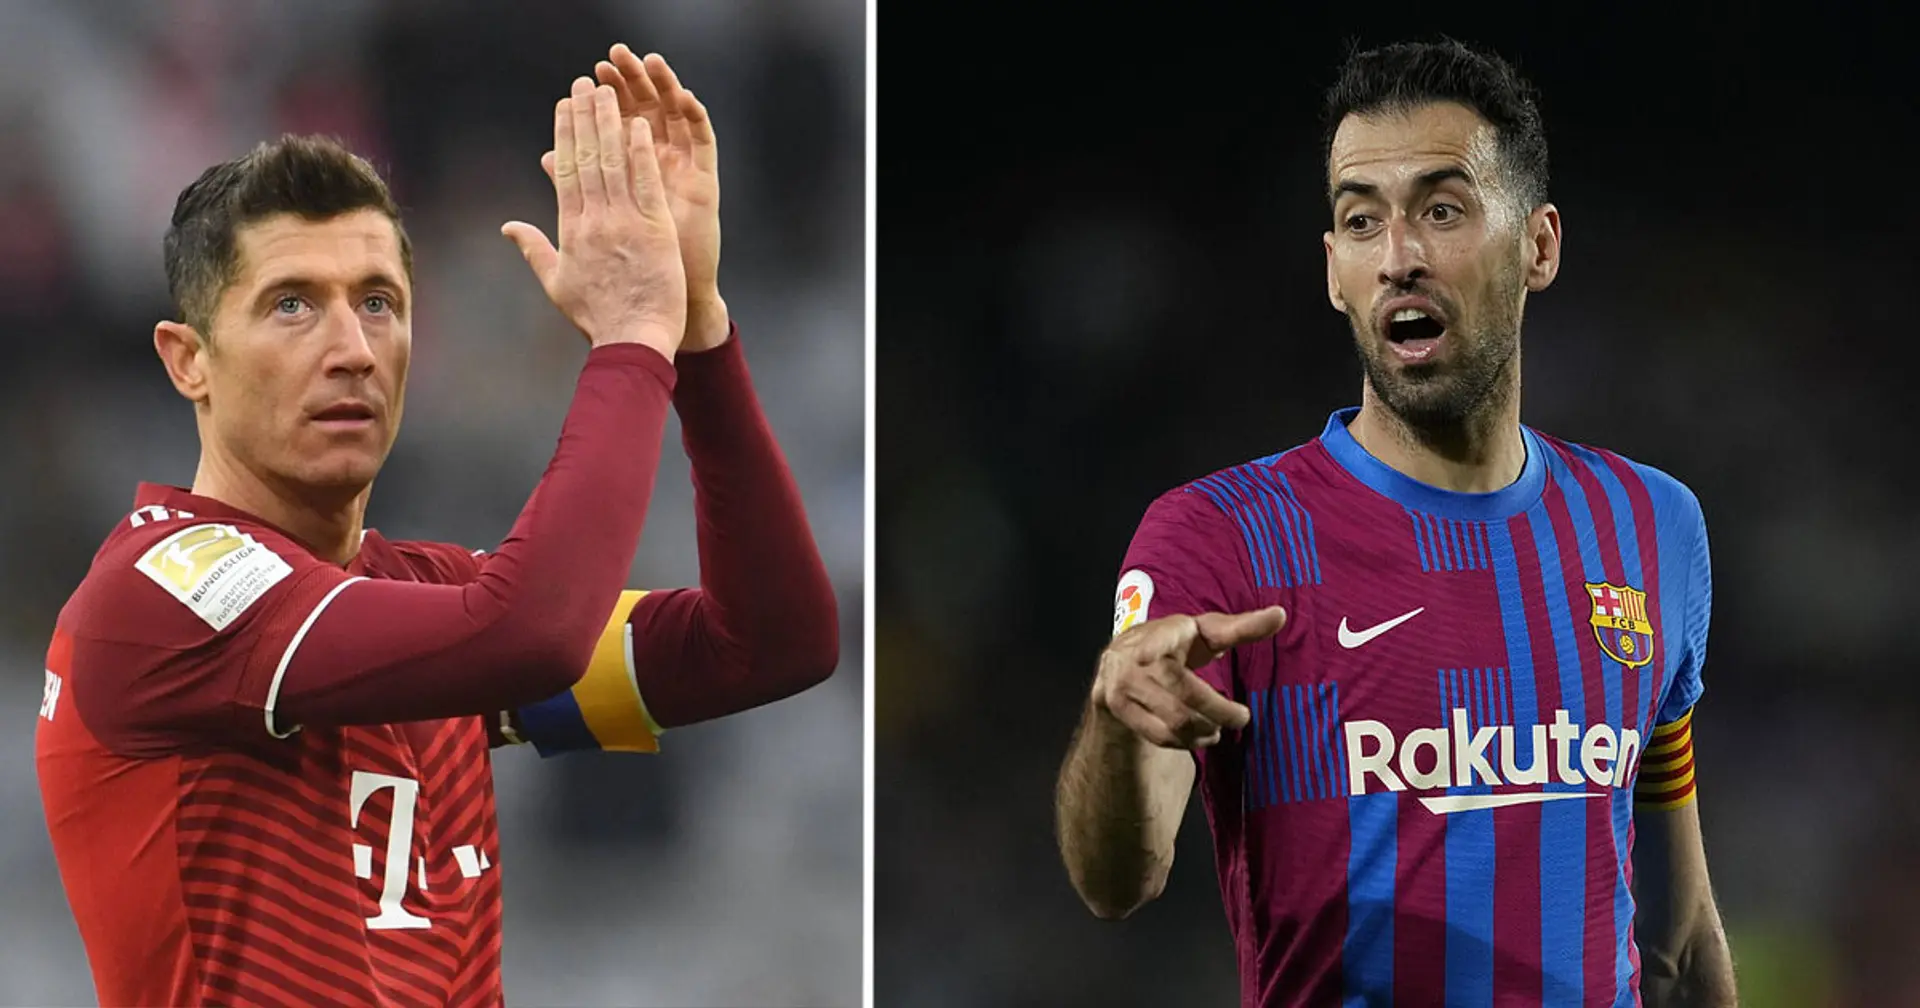 Busquets to leave next summer and 3 more big stories you could've missed